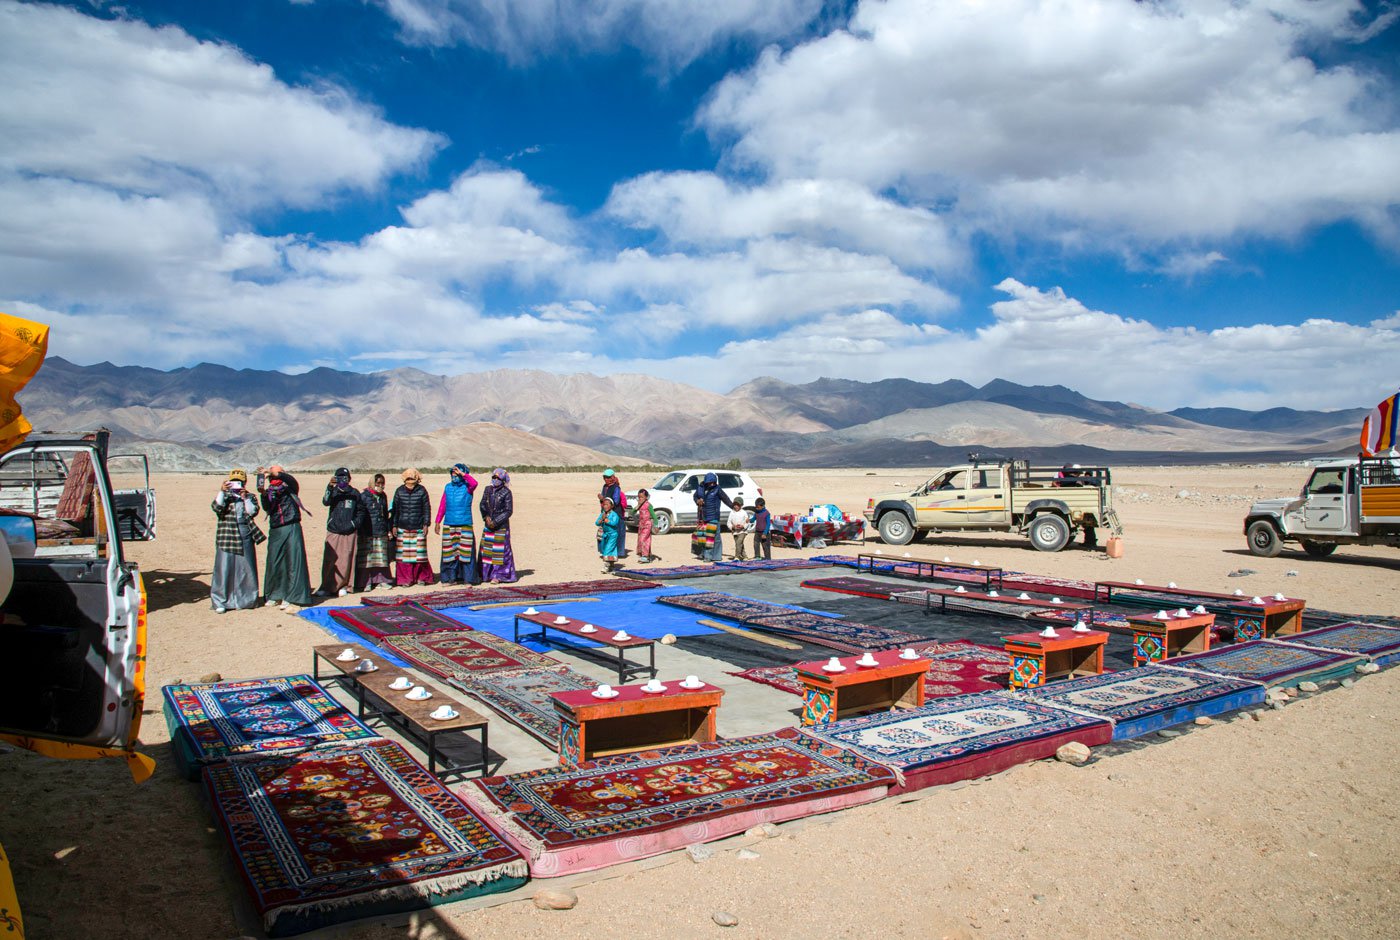 En-route to Naga Basti, the procession’s convoy stops at Bug village as residents come to seek their blessings from the lamas of Hanle monastery. They have prepared refreshments for the convoy